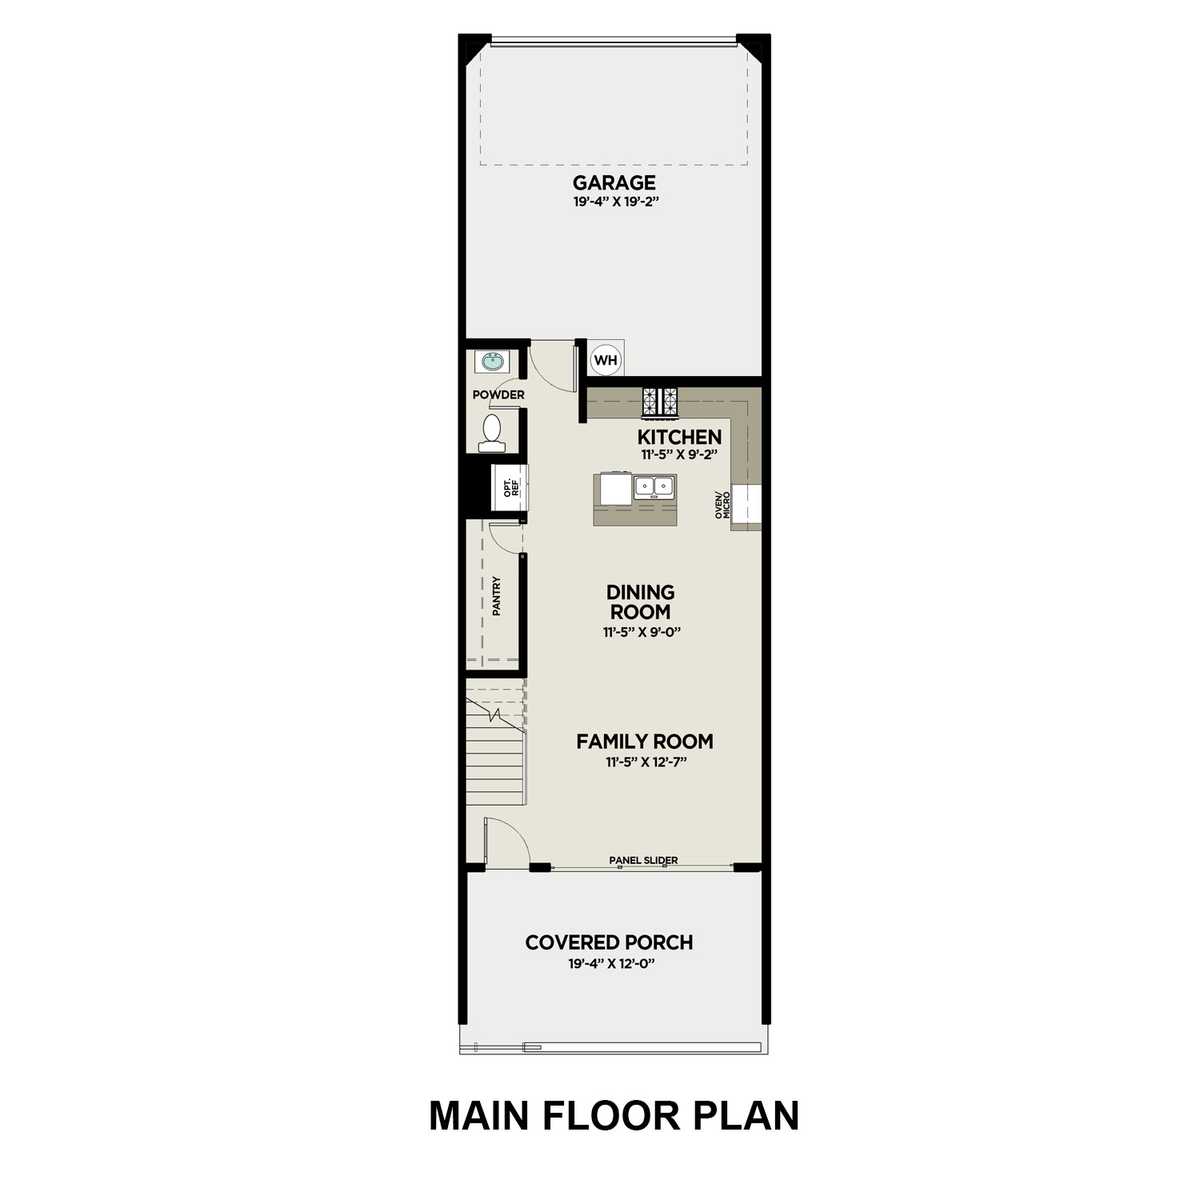 1 - The Seacrest A floor plan layout for 615 Stickley Oak Way in Davidson Homes' The Village at Towne Lake community.